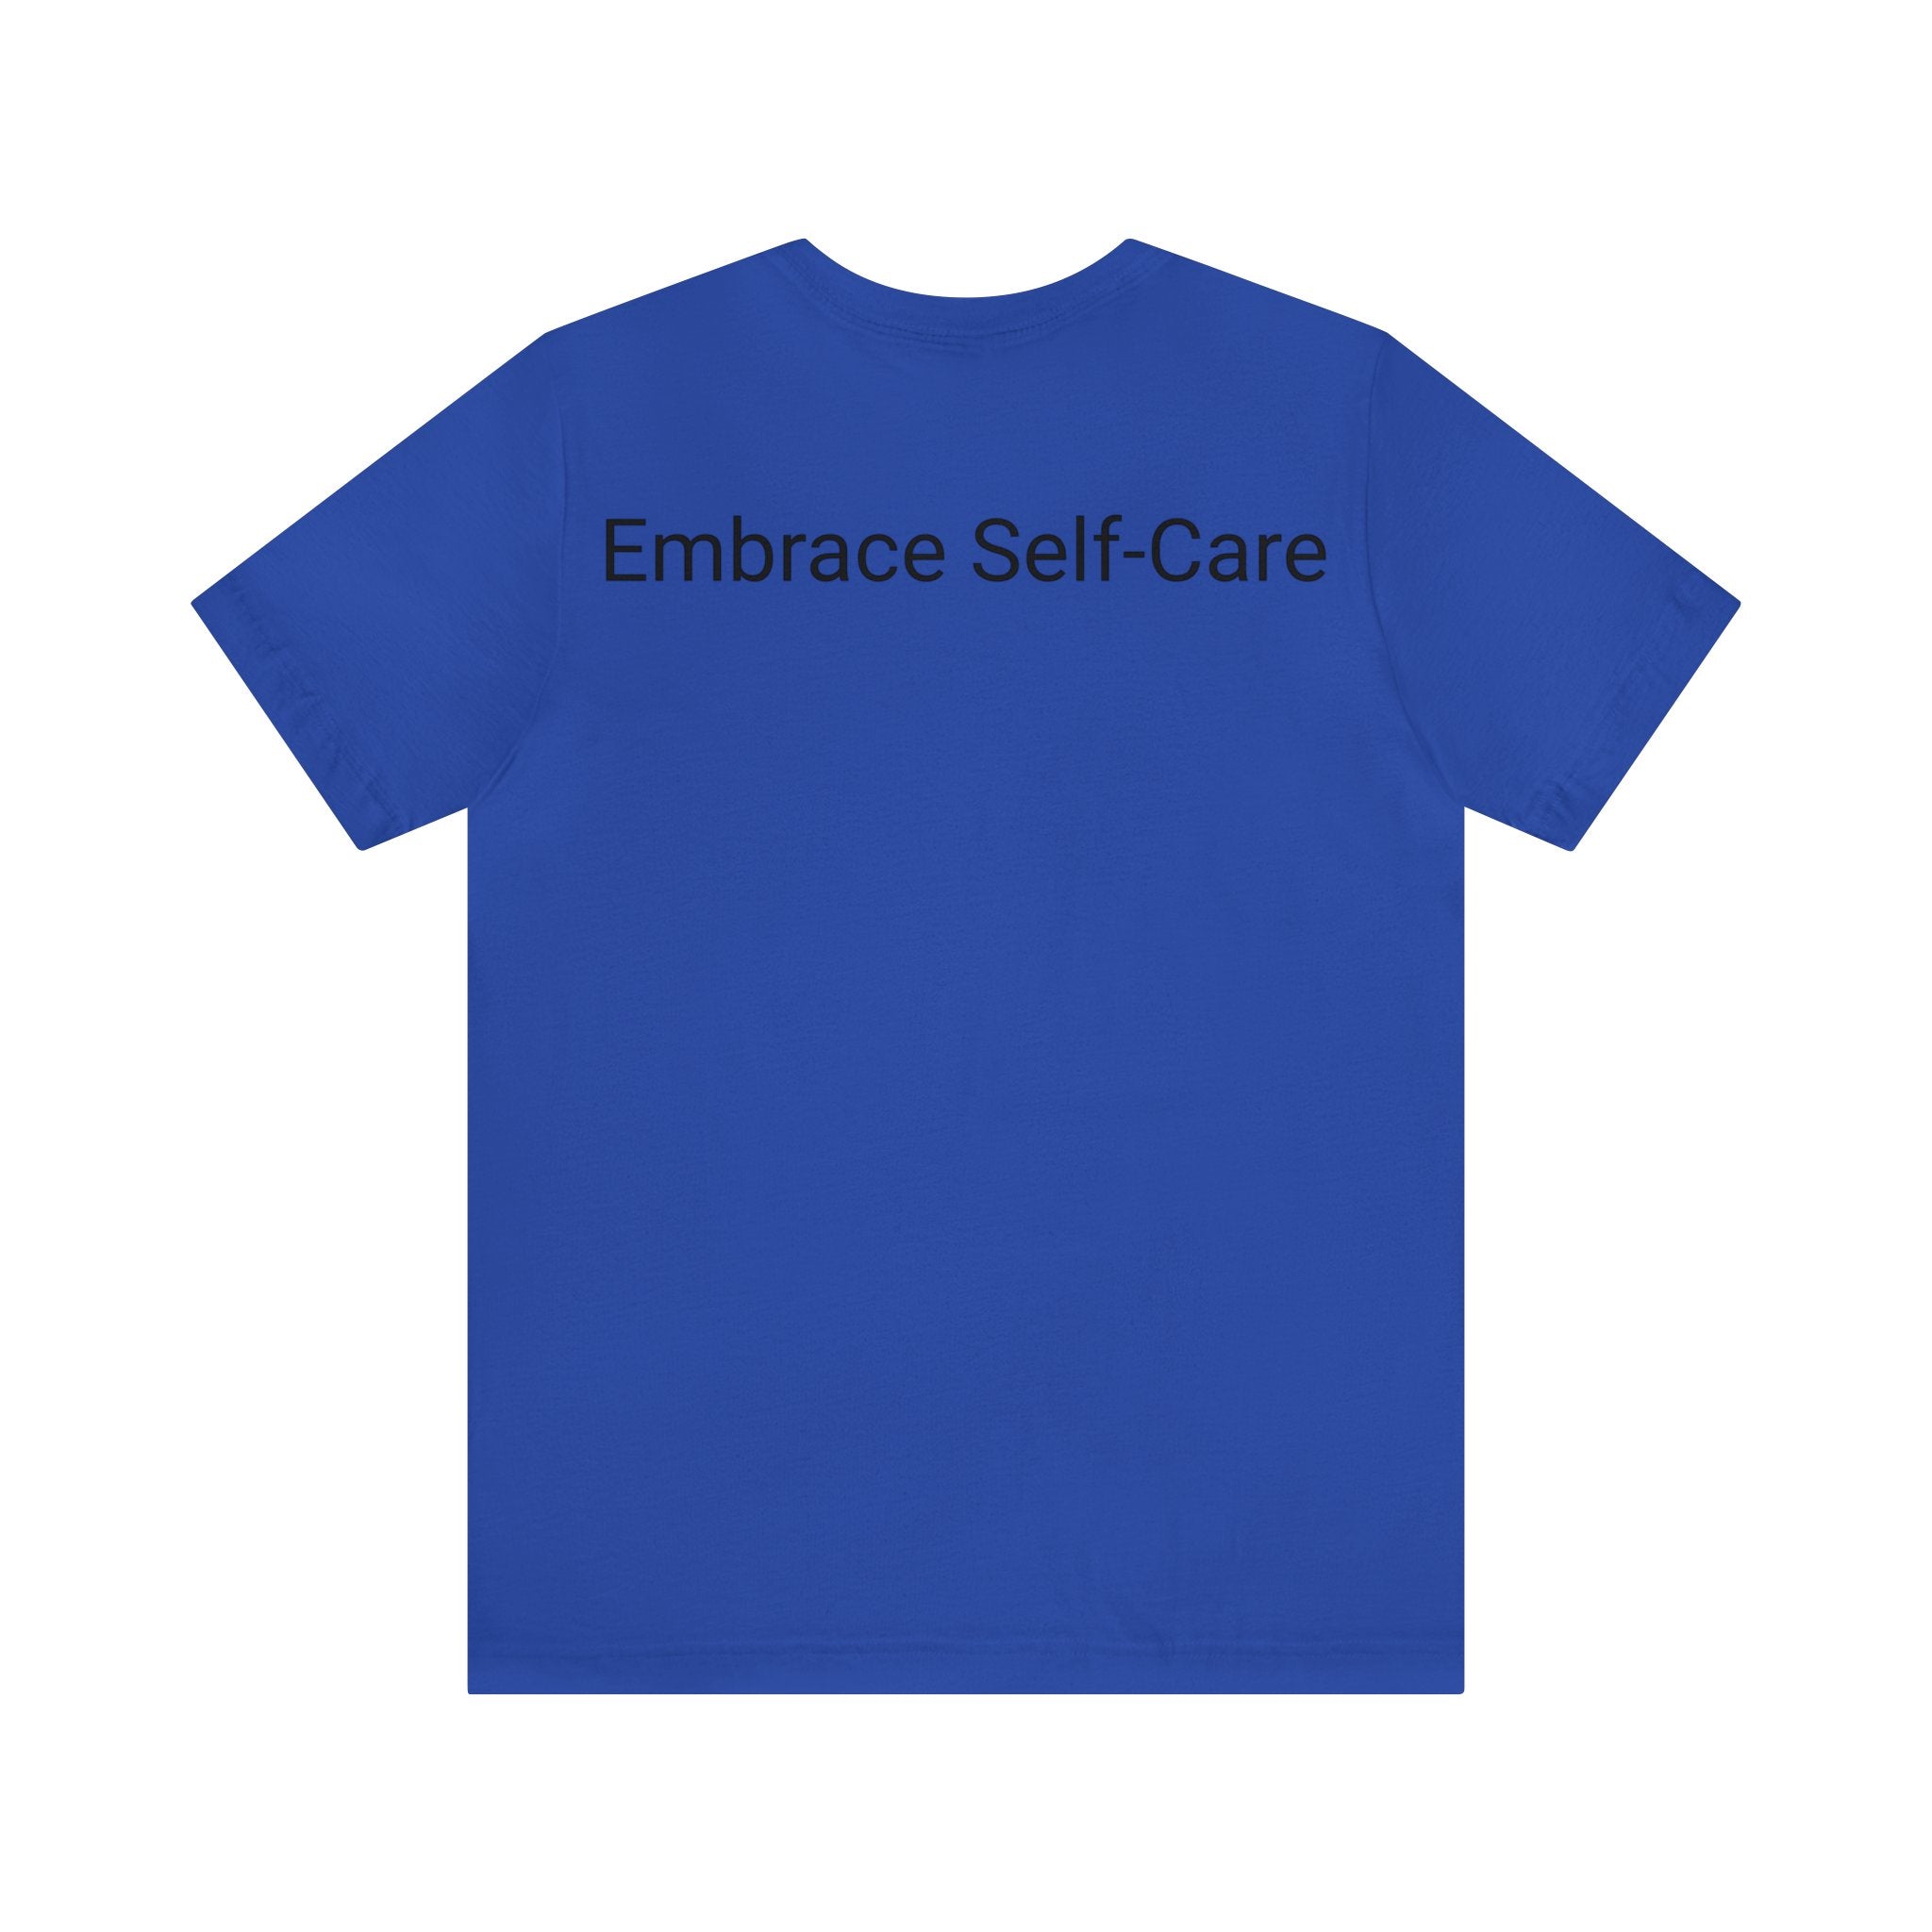 Embrace Self-Care Jersey Tee - Bella+Canvas 3001 Heather Mauve Airlume Cotton Bella+Canvas 3001 Crew Neckline Jersey Short Sleeve Lightweight Fabric Mental Health Support Retail Fit Tear-away Label Tee Unisex Tee T-Shirt 17599598168110438813_2048 Printify